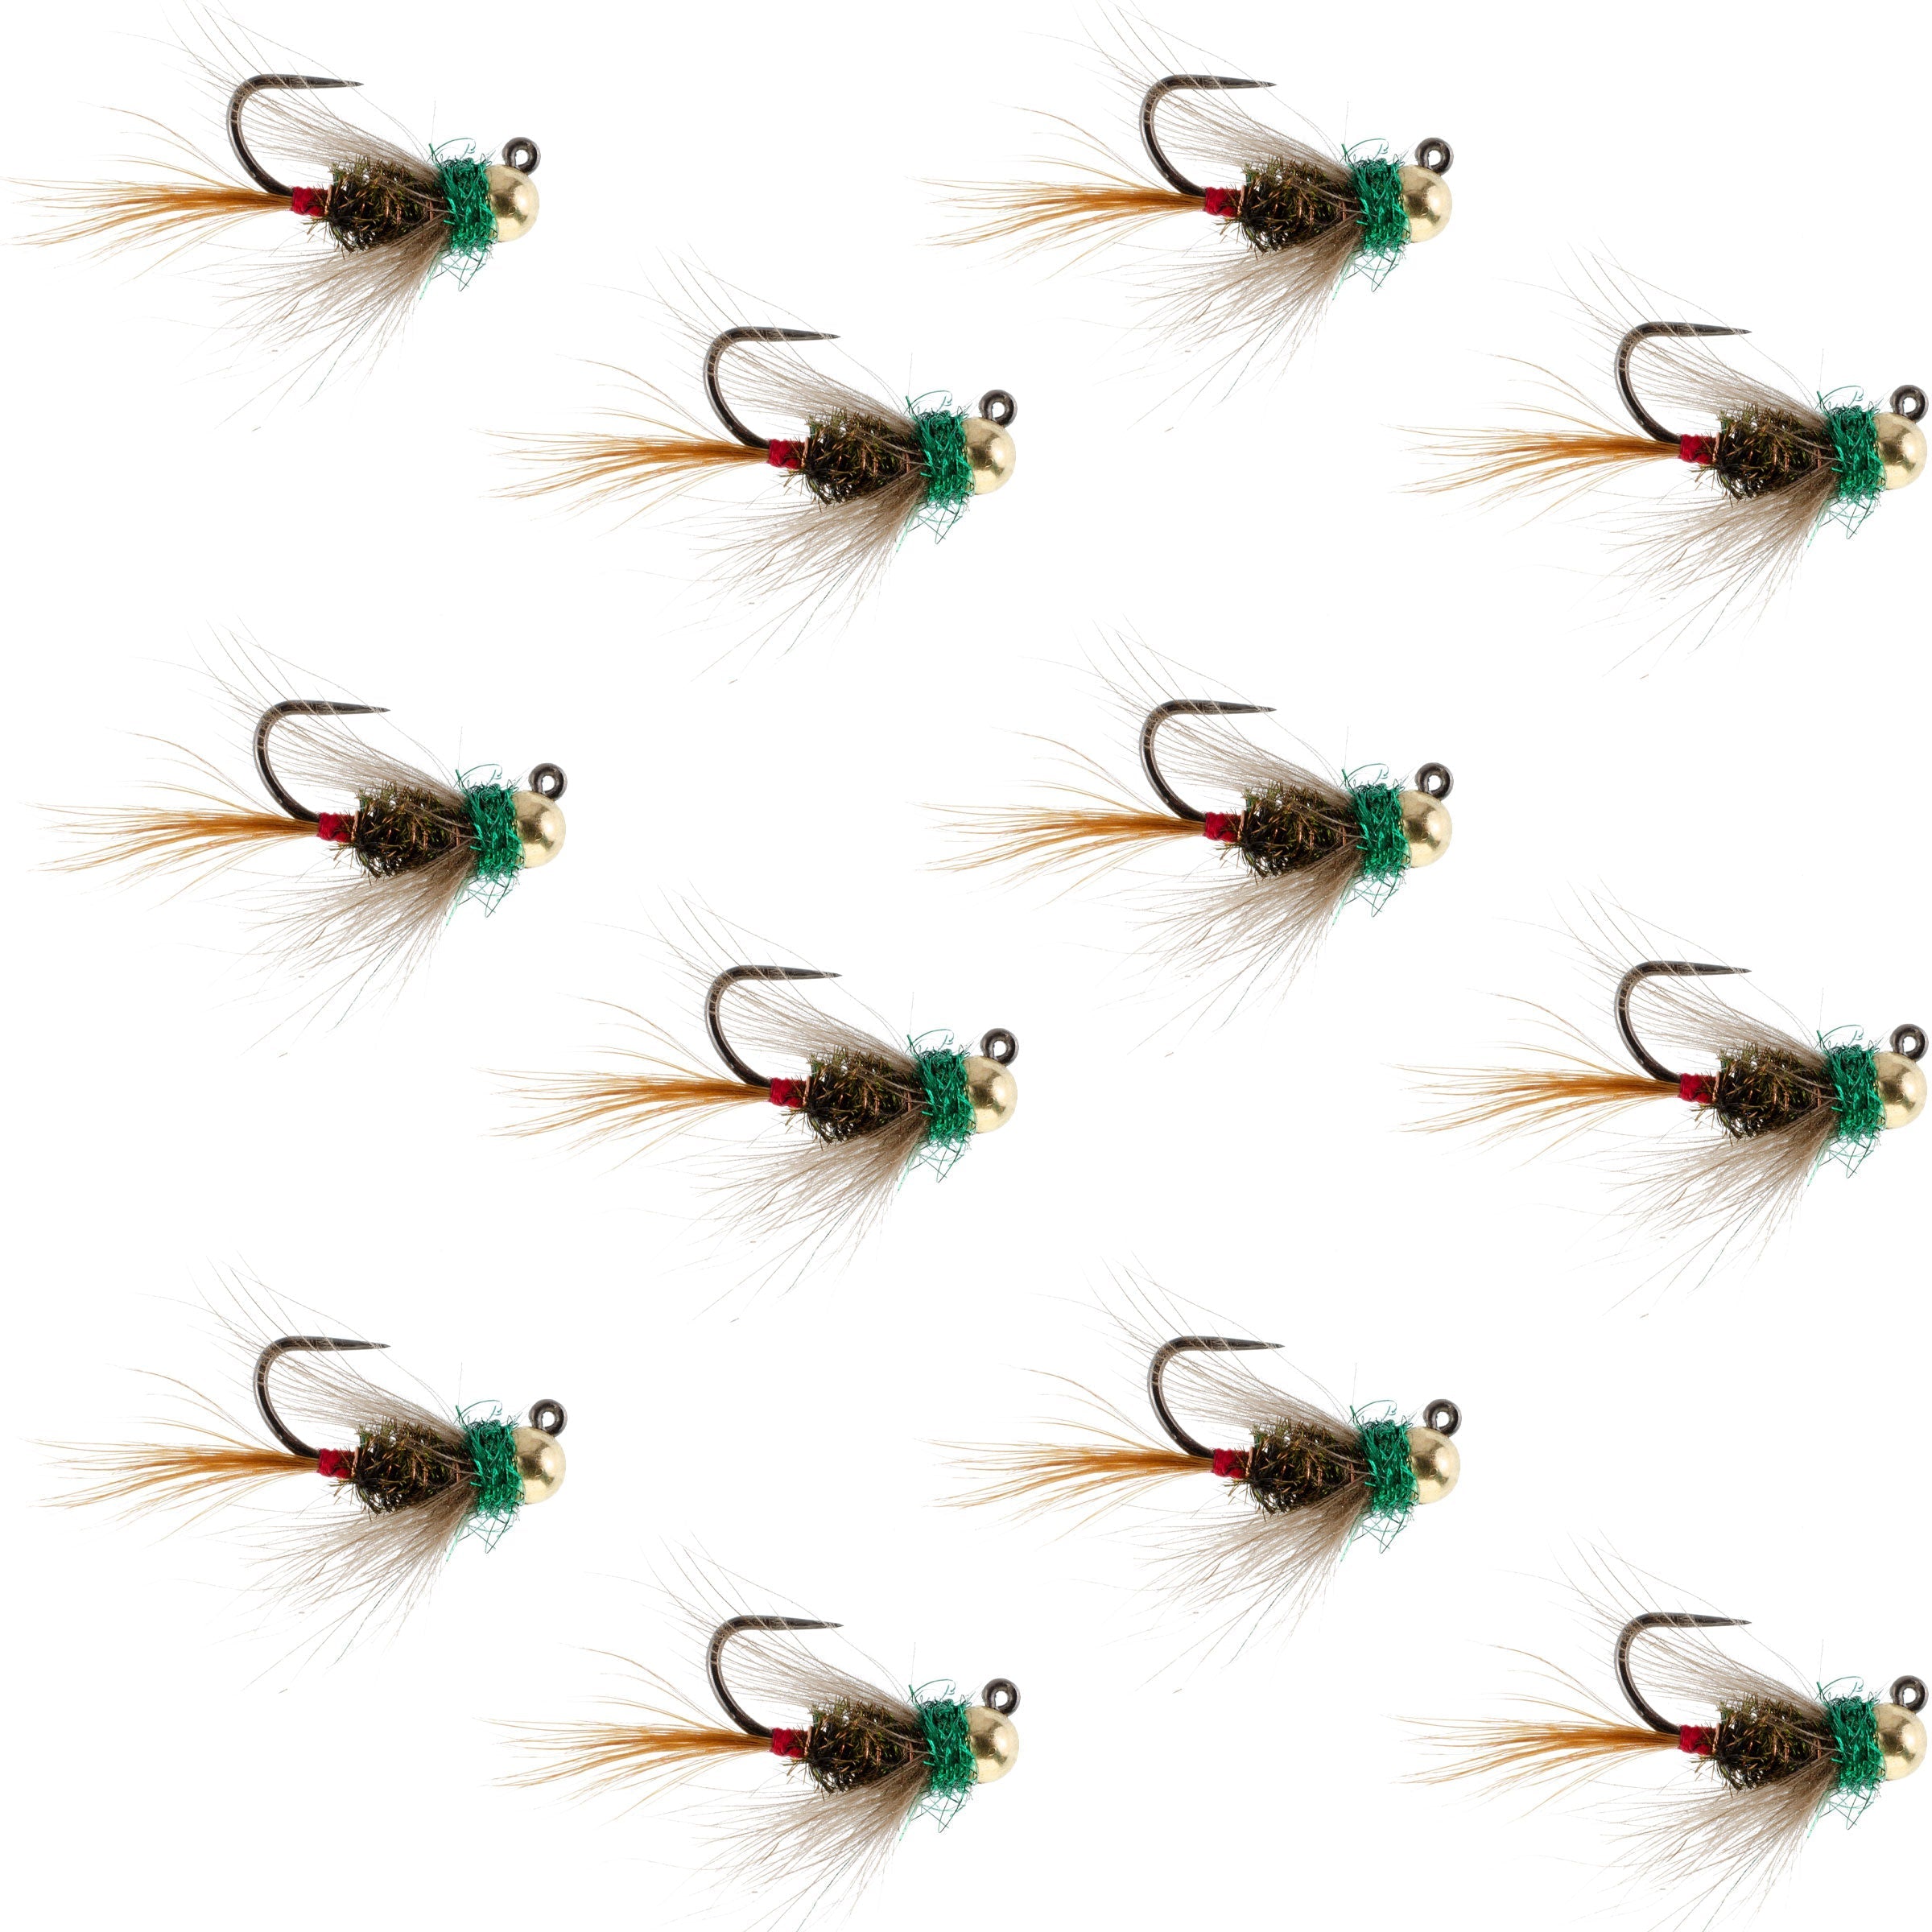 Tungsten Bead Tactical CDC Frenchie Czech Nymph Euro Nymphing Fly - 1 Dozen Flies Size 16